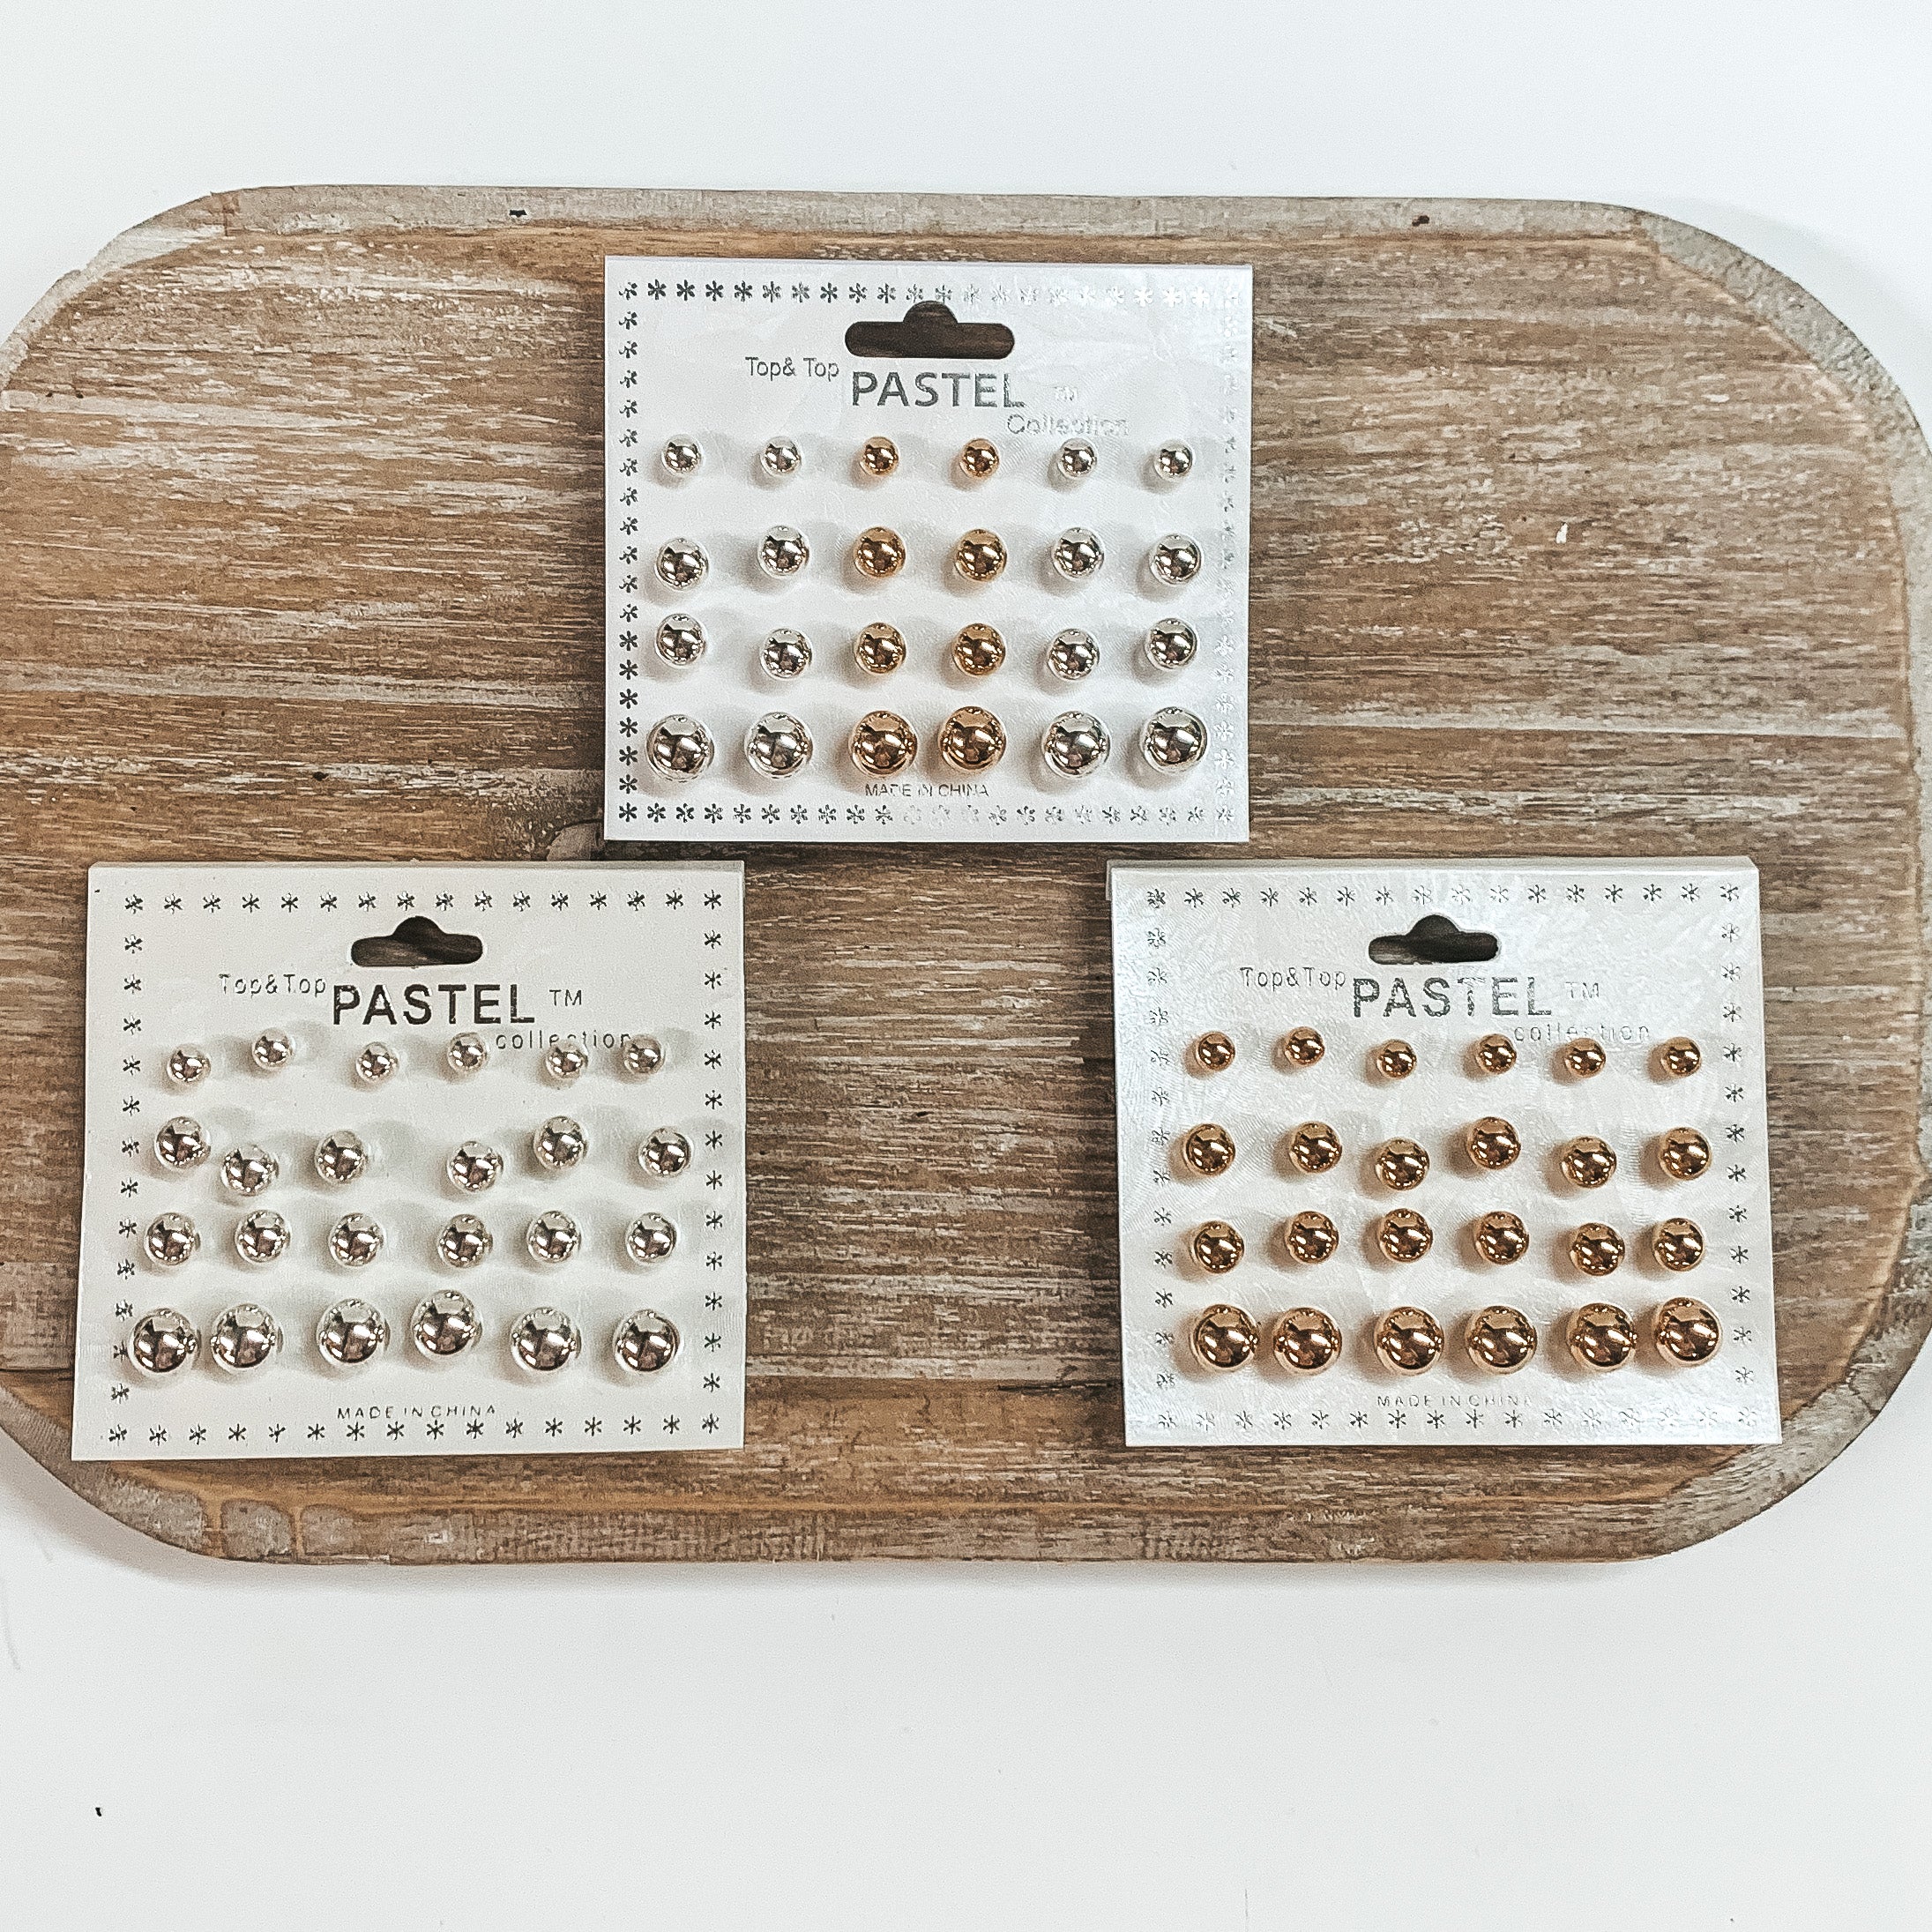 There are three packs of twelve stud earrings on a white earring card holder. They come in different sizes and different colors such as silver, gold, or both.